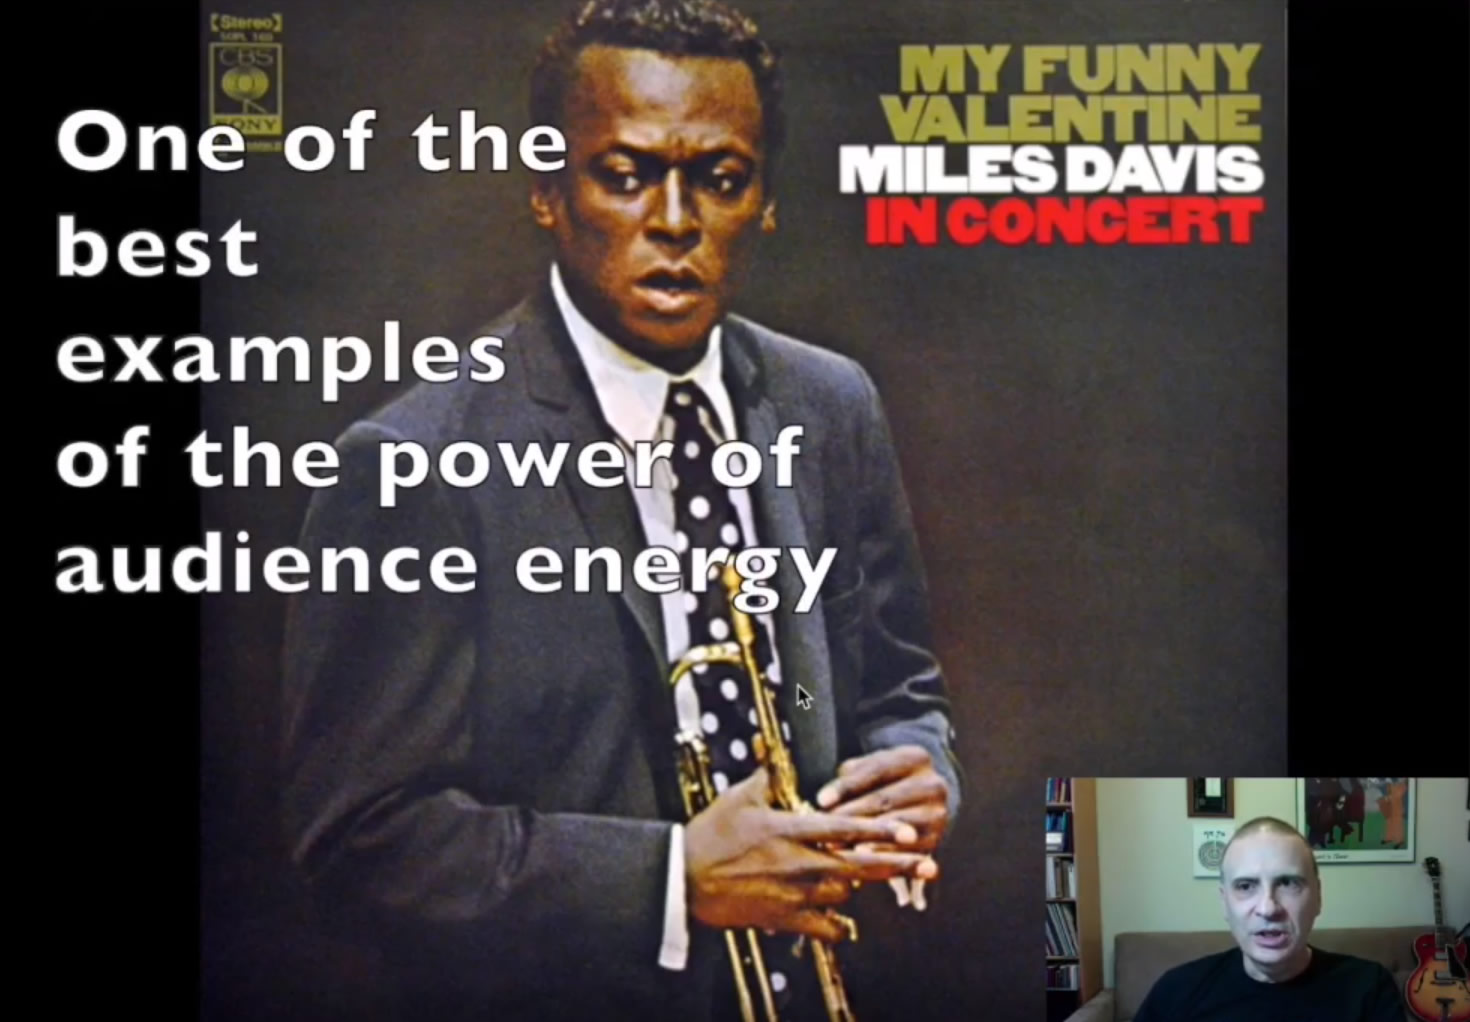 Miles Davis, one of the best examples of the power of audience energy